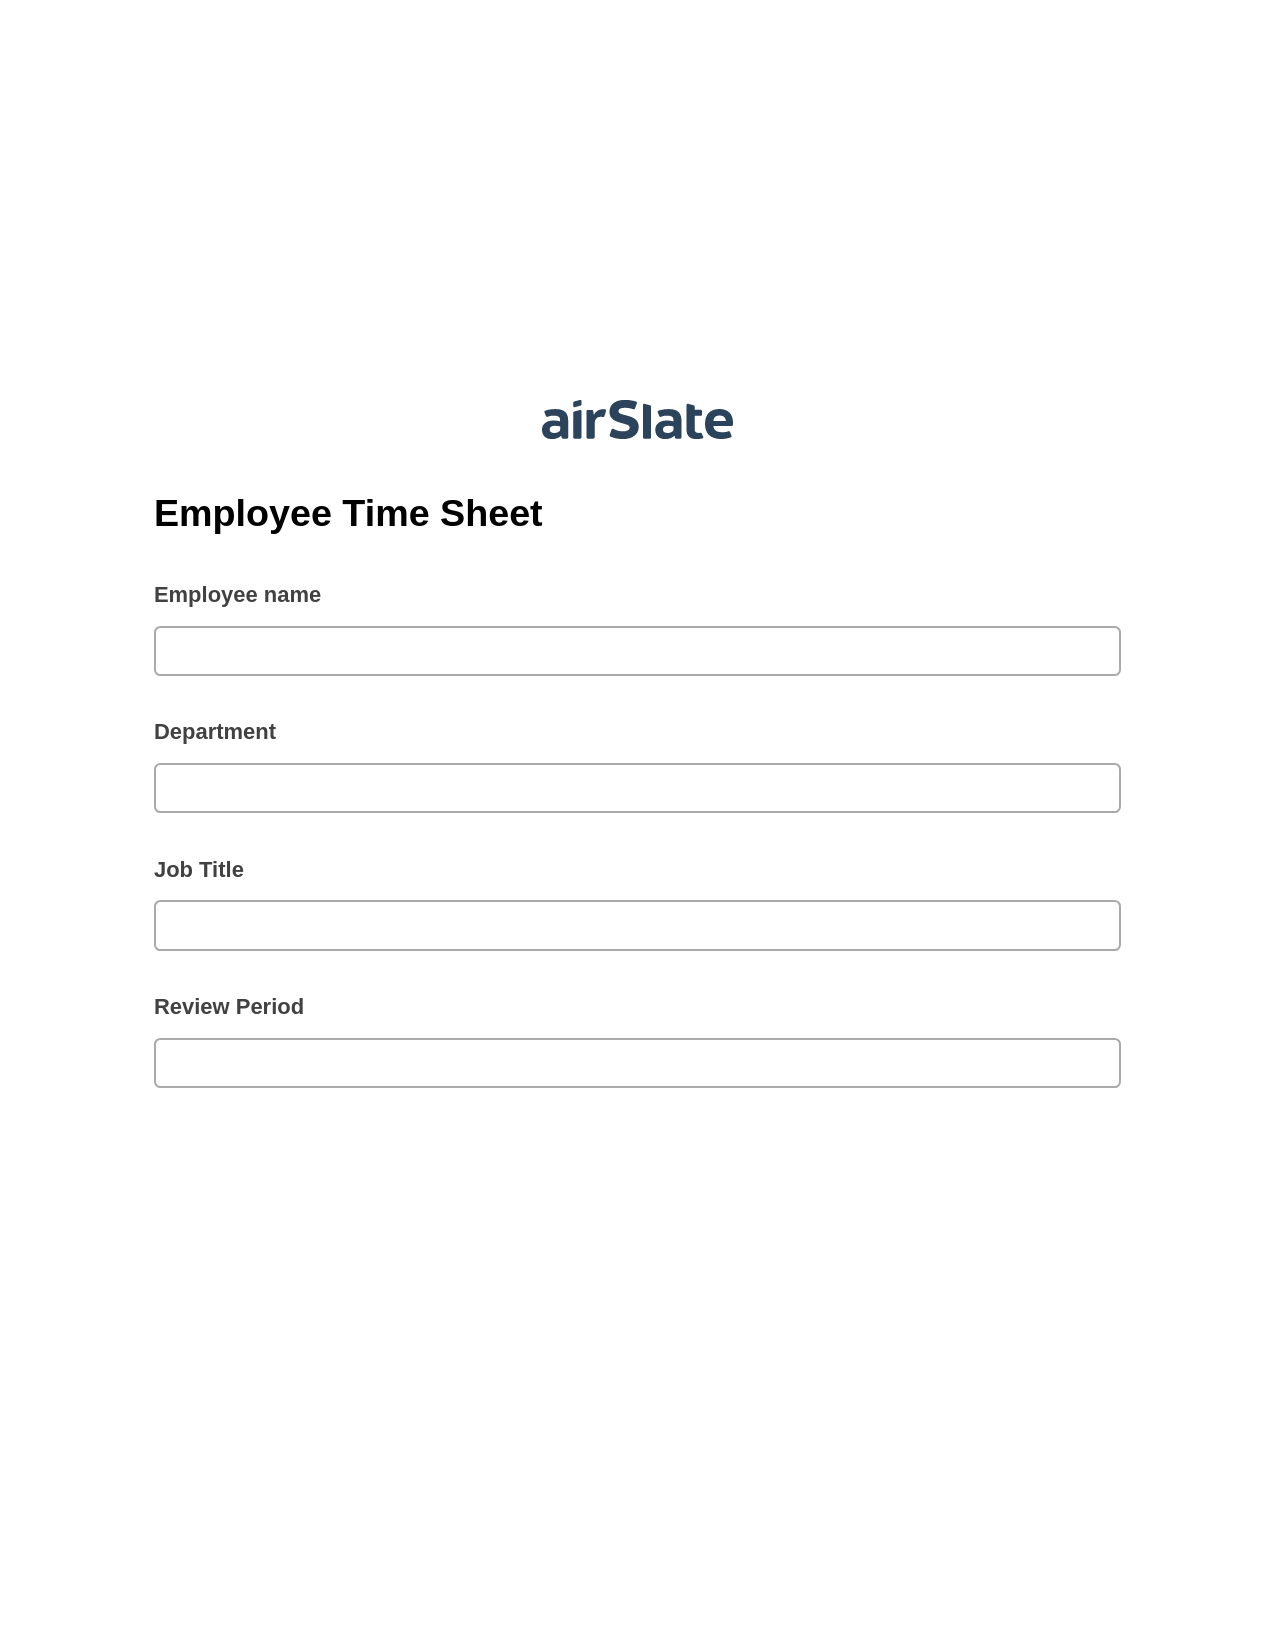 Employee Time Sheet Pre-fill from another Slate Bot, Create Salesforce Records Bot, Archive to Dropbox Bot